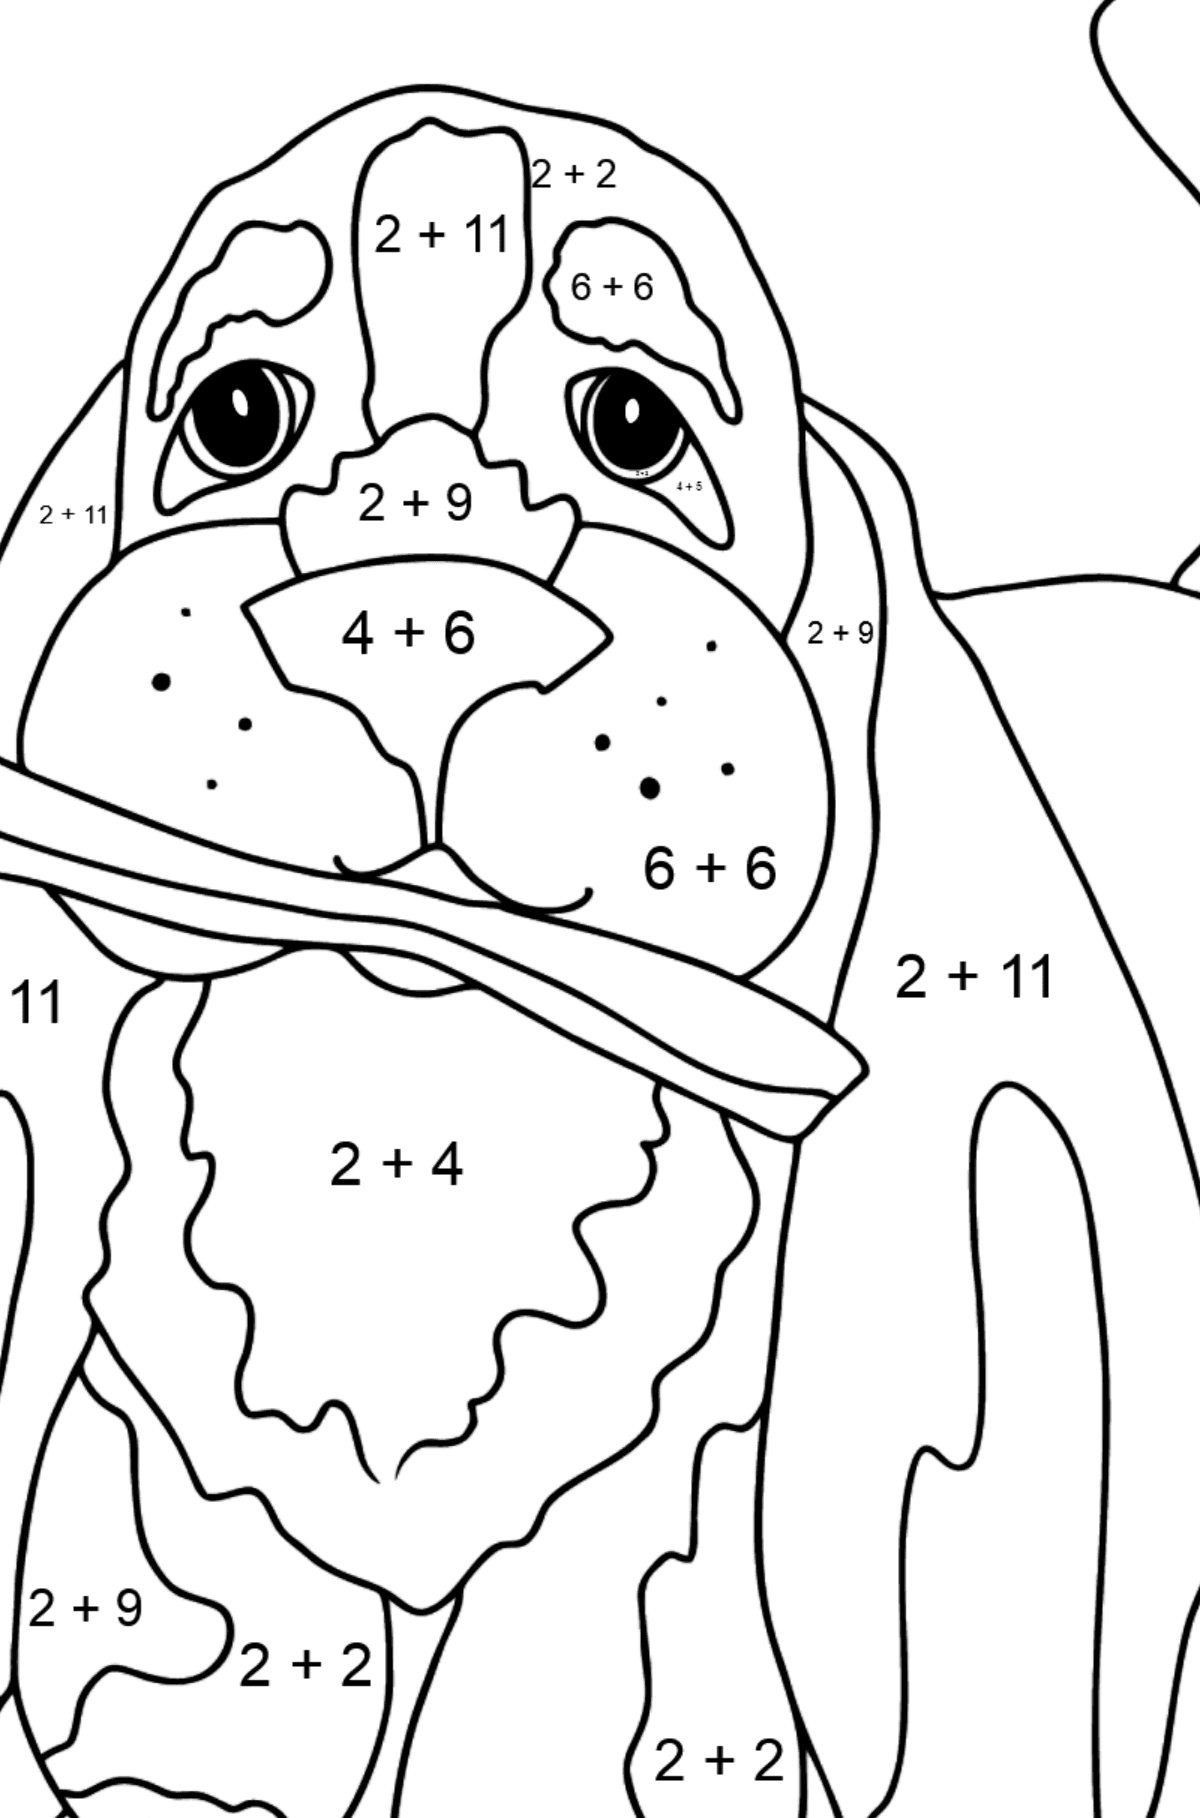 Coloring Page - A Dog is Waiting for Its Owner with a Stick - Math Coloring - Addition for Kids